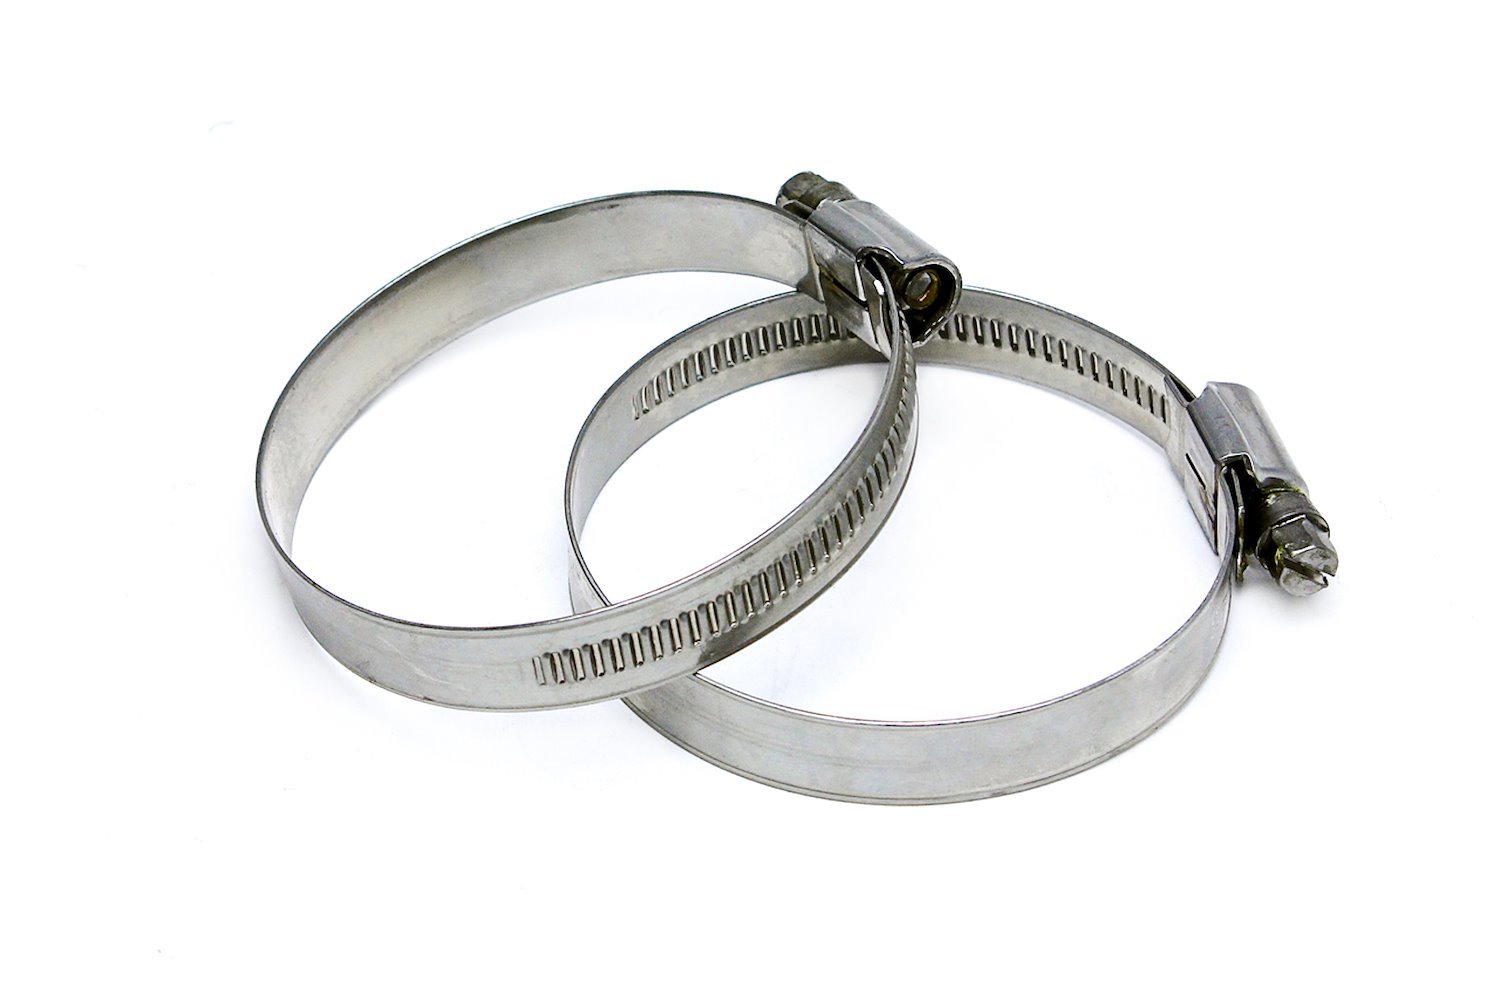 EMSC-40-60x2 Embossed Hose Clamp, Stainless Steel Embossed Hose Clamp, Size #28, Effective Range: 1-9/16 in.- 2-1/4 in., 2Pc